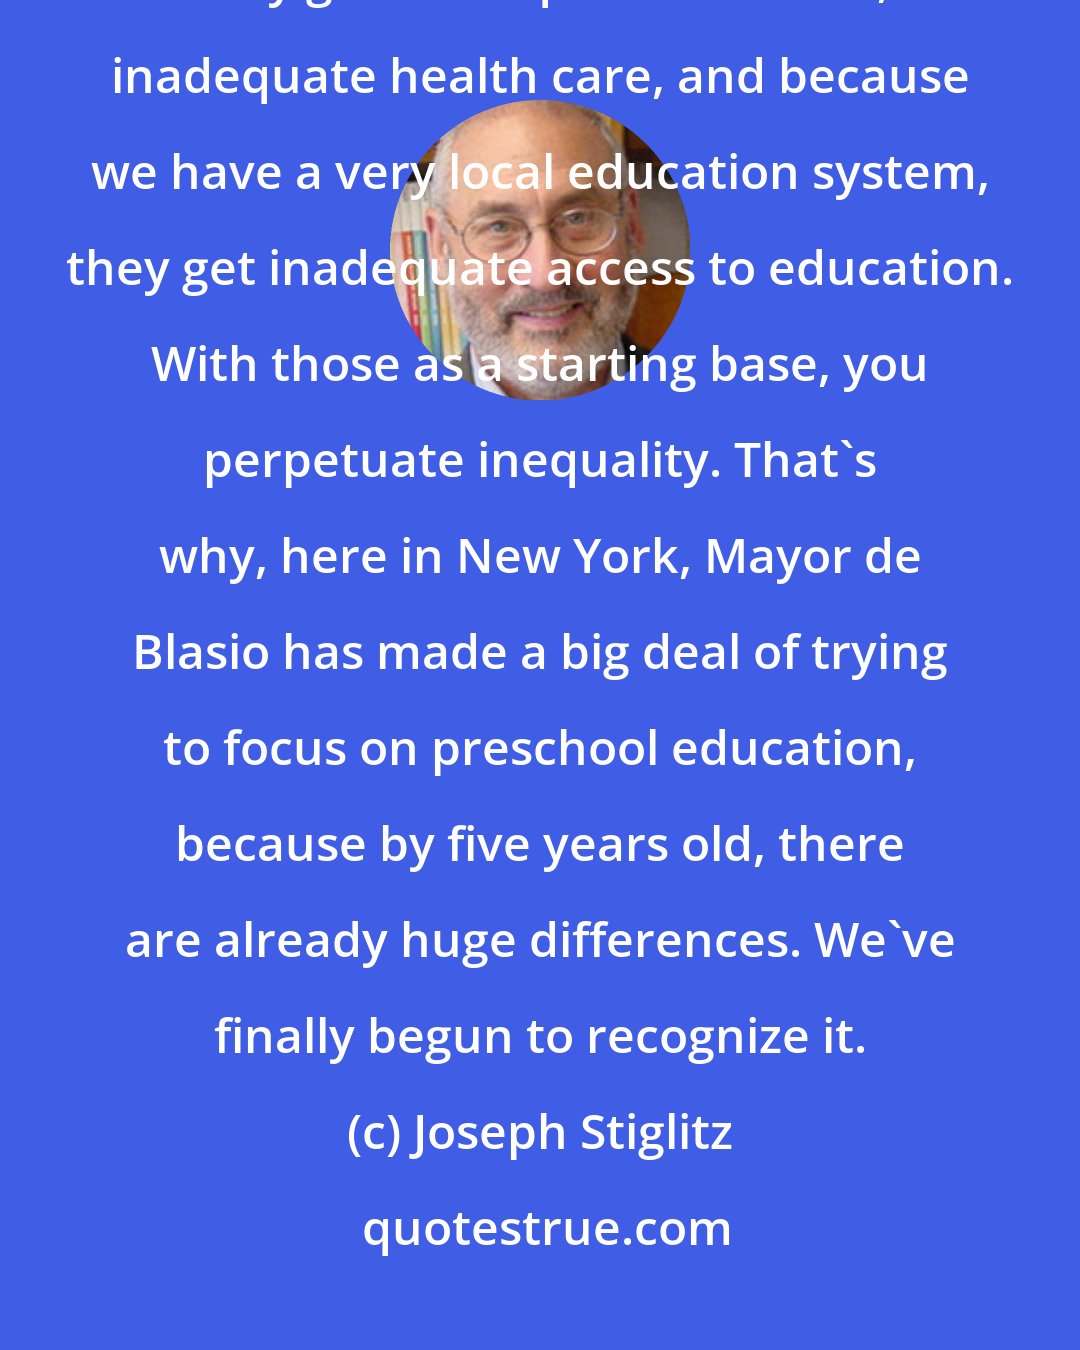 Joseph Stiglitz: Twenty per cent of American children grow up in poverty, and that means they get inadequate nutrition, inadequate health care, and because we have a very local education system, they get inadequate access to education. With those as a starting base, you perpetuate inequality. That's why, here in New York, Mayor de Blasio has made a big deal of trying to focus on preschool education, because by five years old, there are already huge differences. We've finally begun to recognize it.